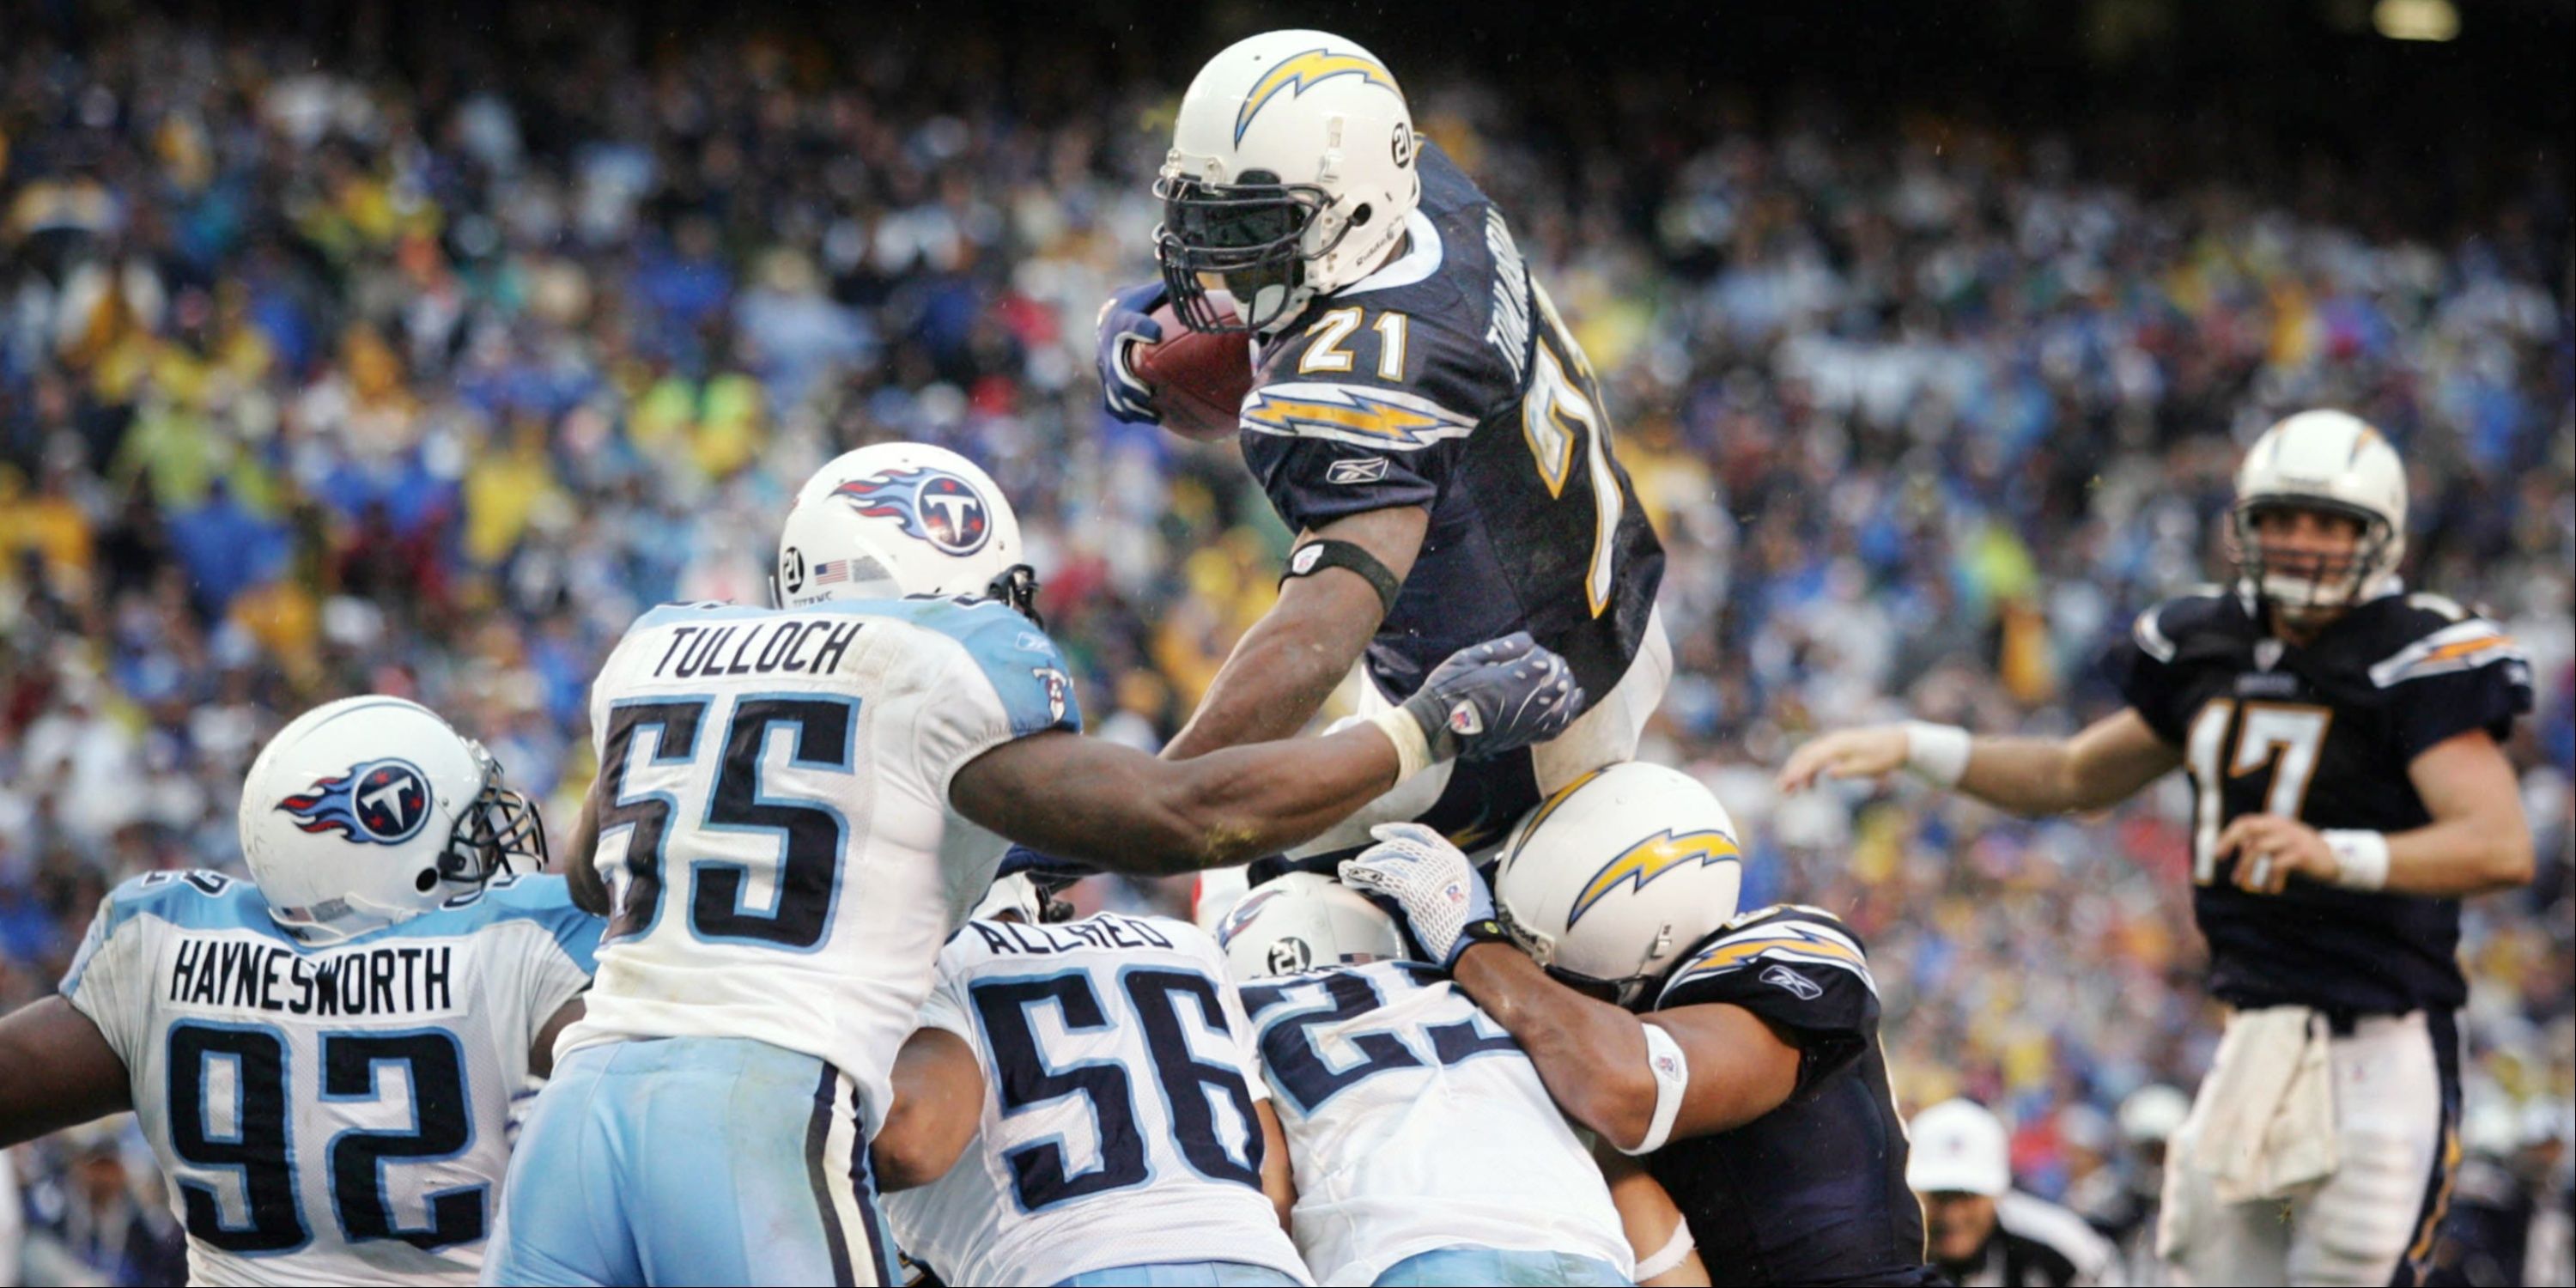 LaDainian Tomlinson leaps over defenders at the goal line